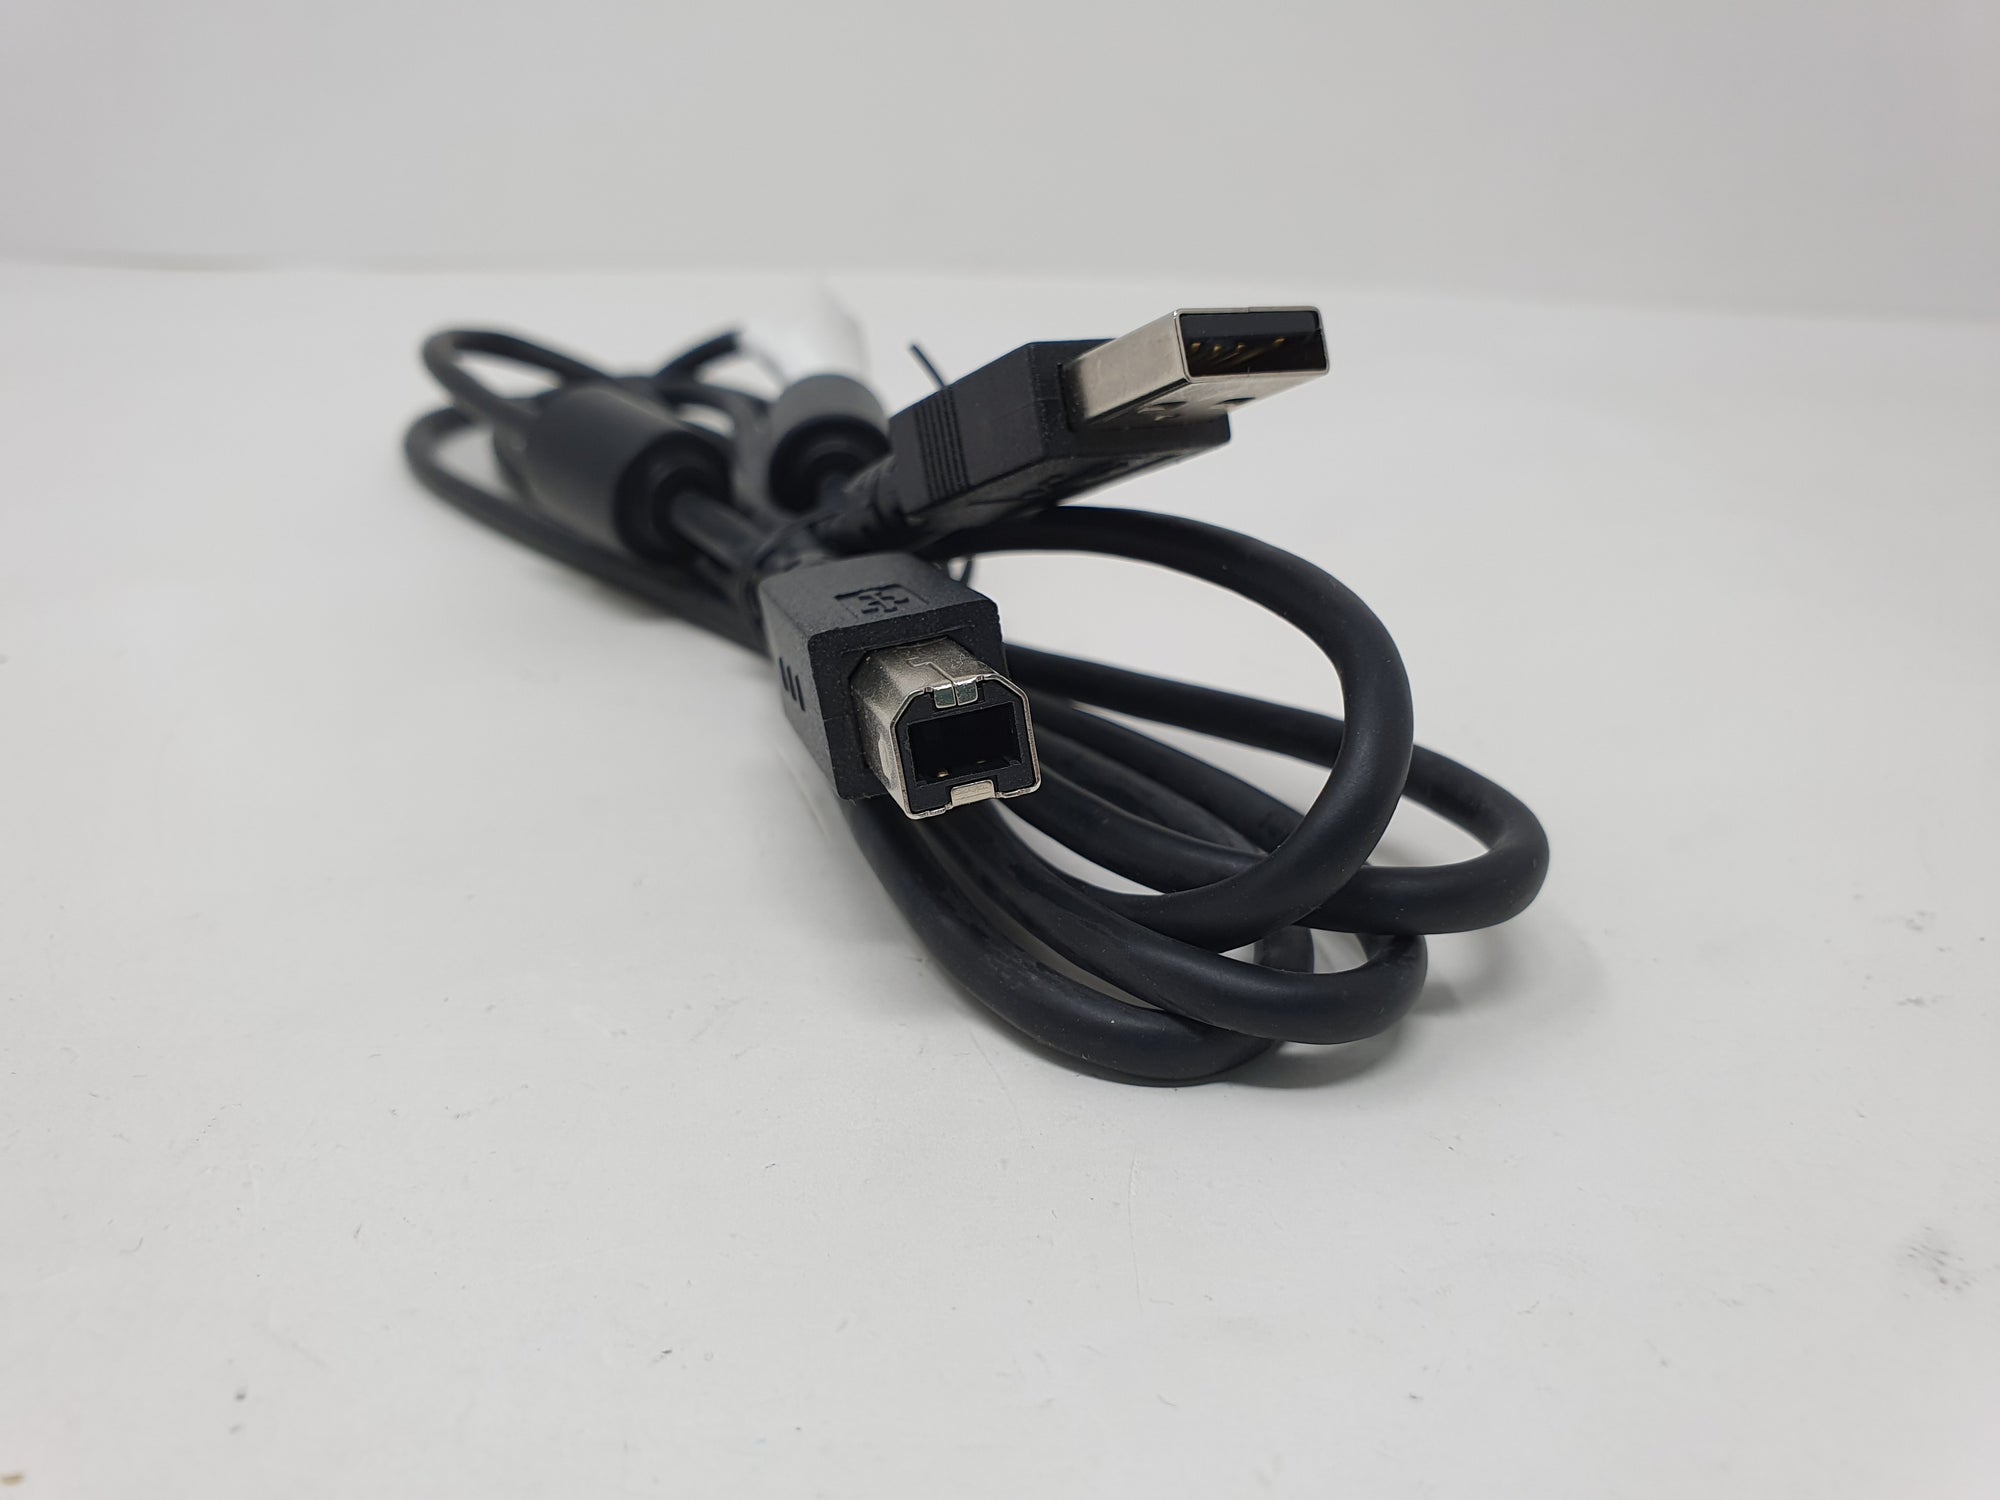 USB Printer Cable Lead Type A to Type B USB 2.0 2M